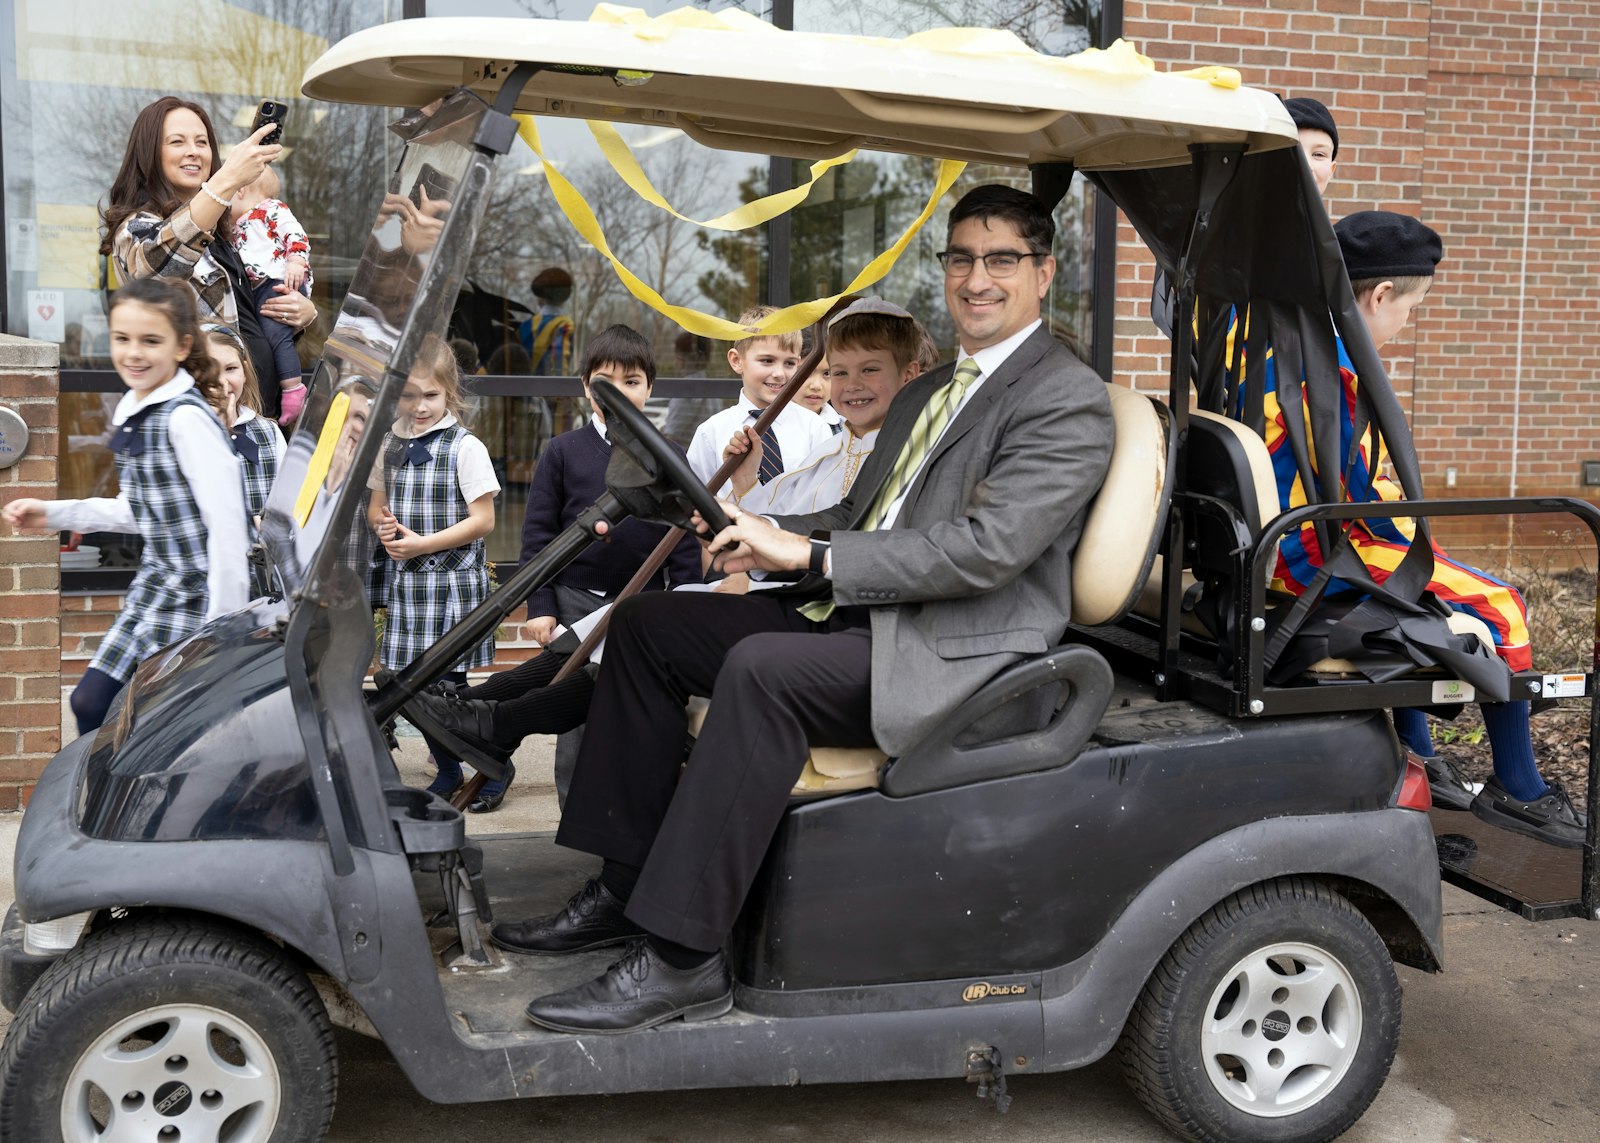 Everest headmaster and high school principal Gregory Reichart drives "Pope Donovan" and his Swiss Guards to the high school in a makeshift "popemobile."